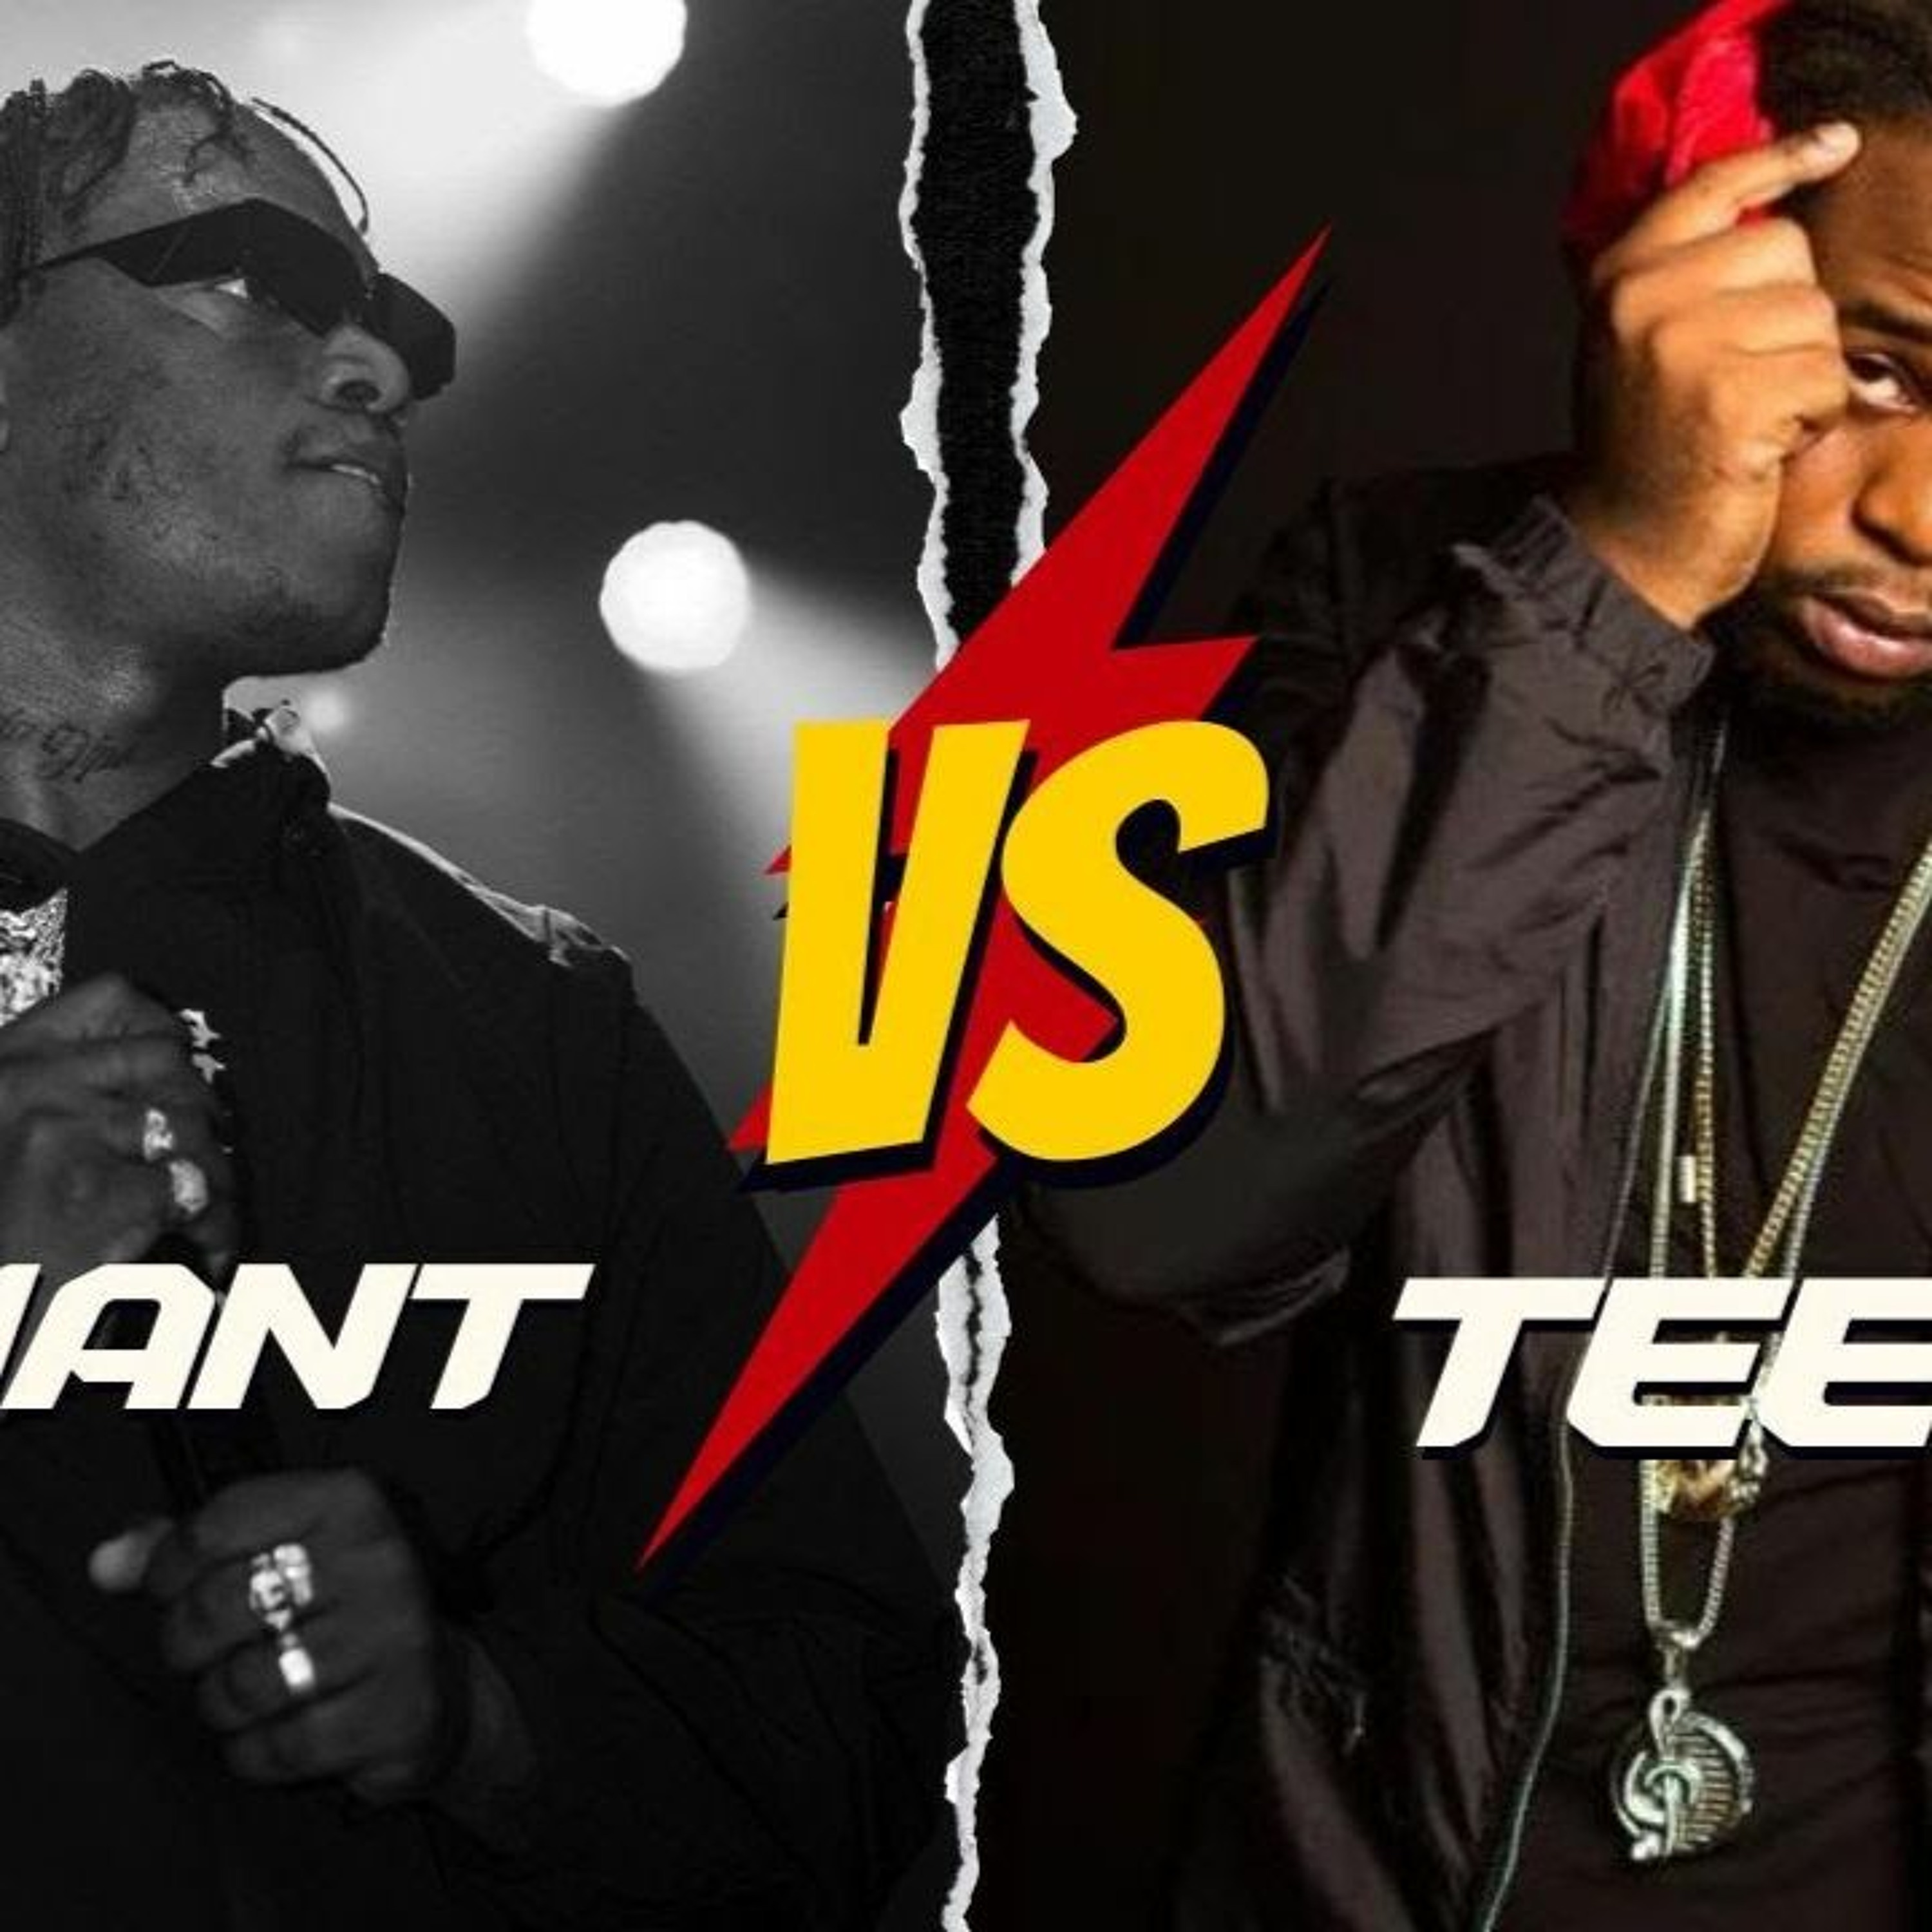 Teejay vs Valiant - who want’s round 3 to be on Anger Management Riddim?